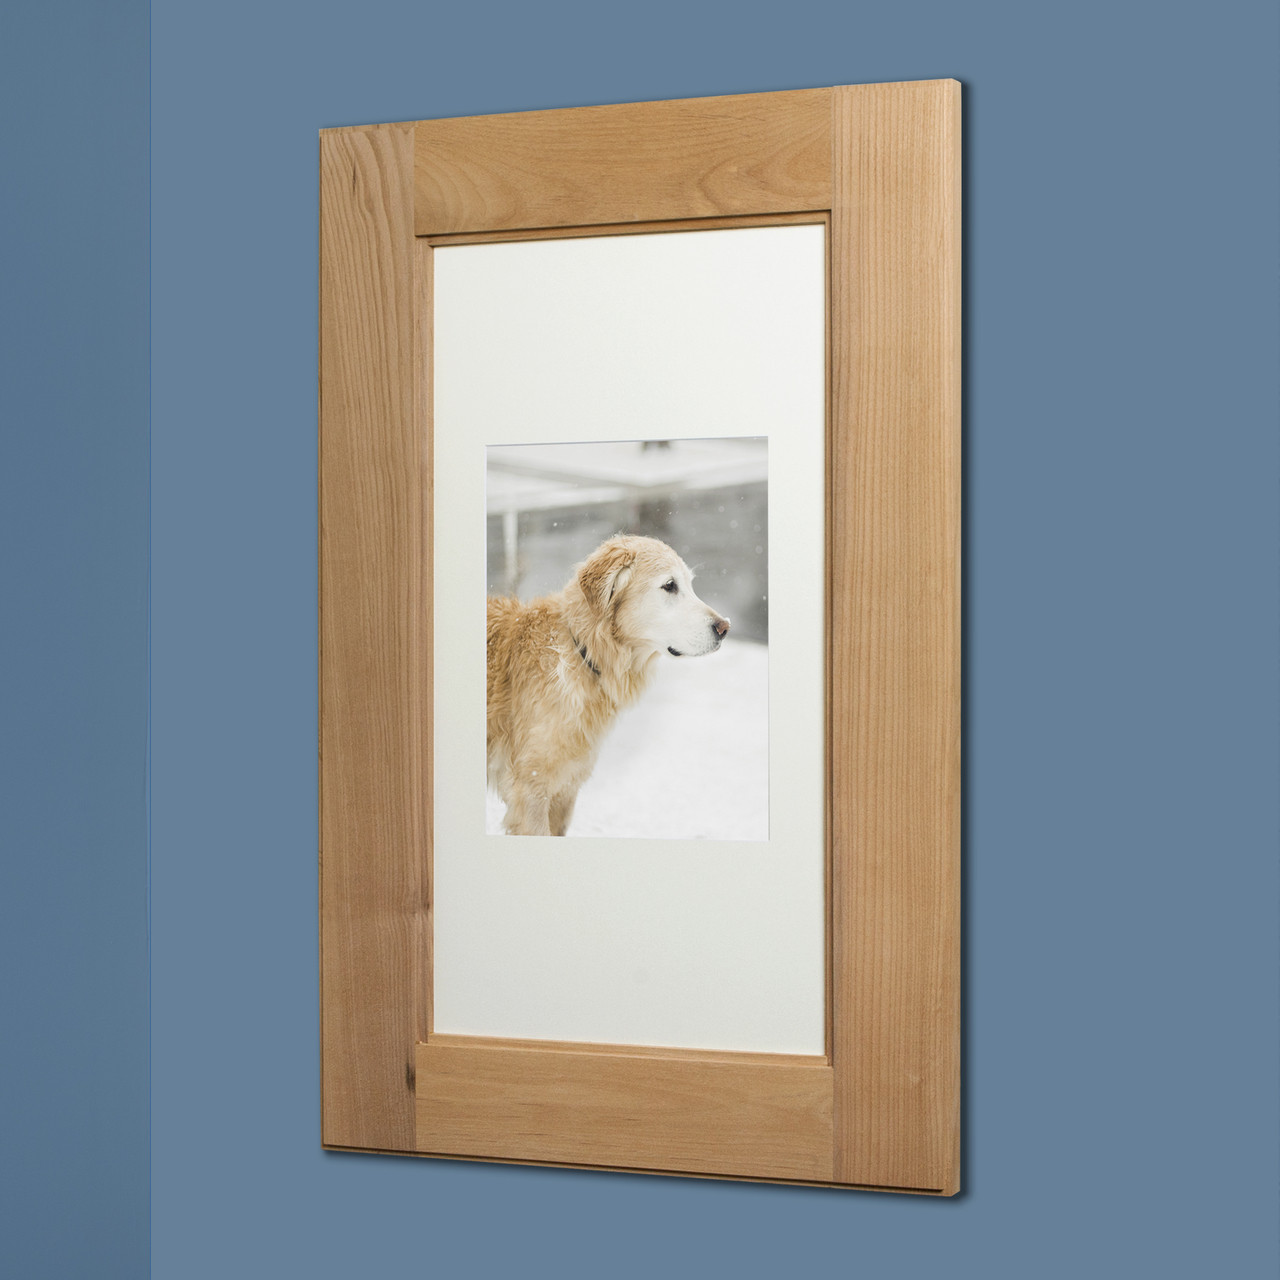 14x18 Concealed Medicine Cabinet (Large), a Recessed Mirrorless Medicine Cabinet with a Picture Frame Door (Shaker White) - 1